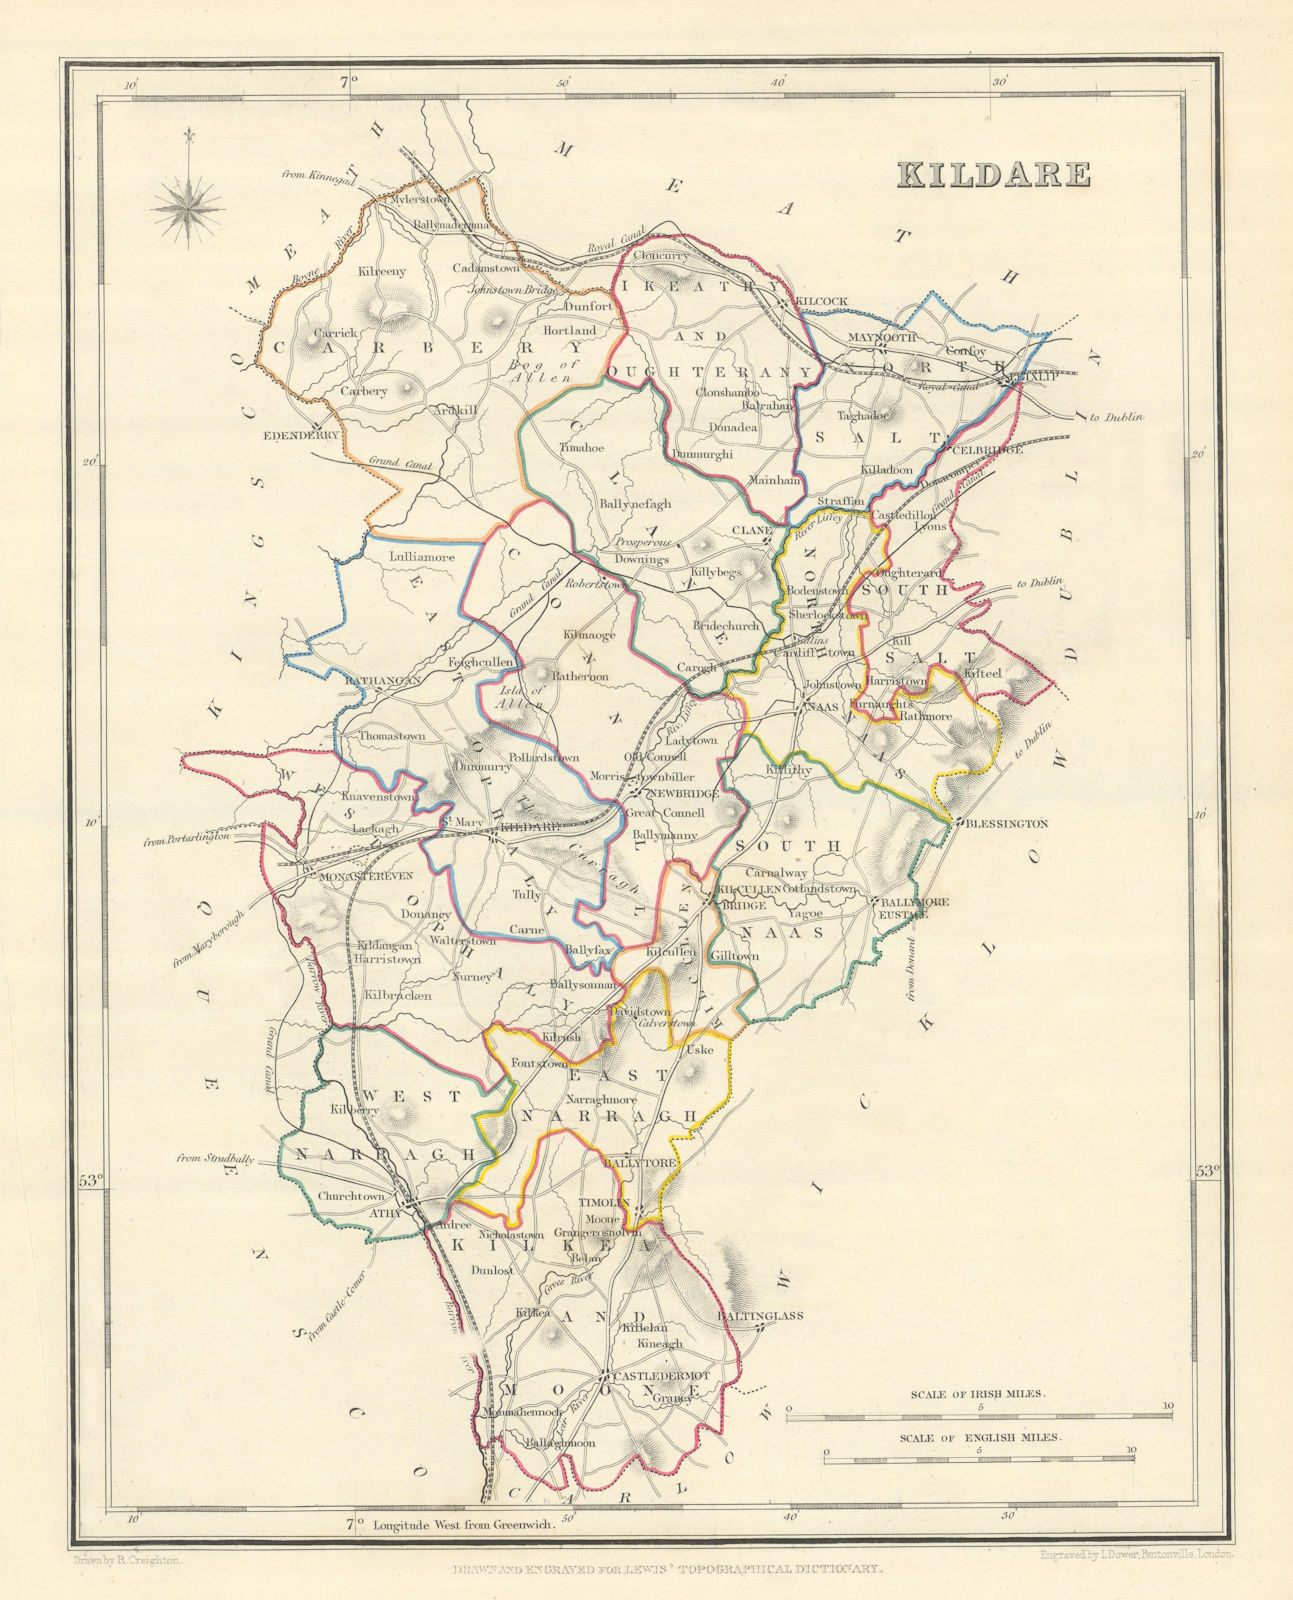 Associate Product COUNTY KILDARE antique map for LEWIS by CREIGHTON & DOWER. Ireland 1850